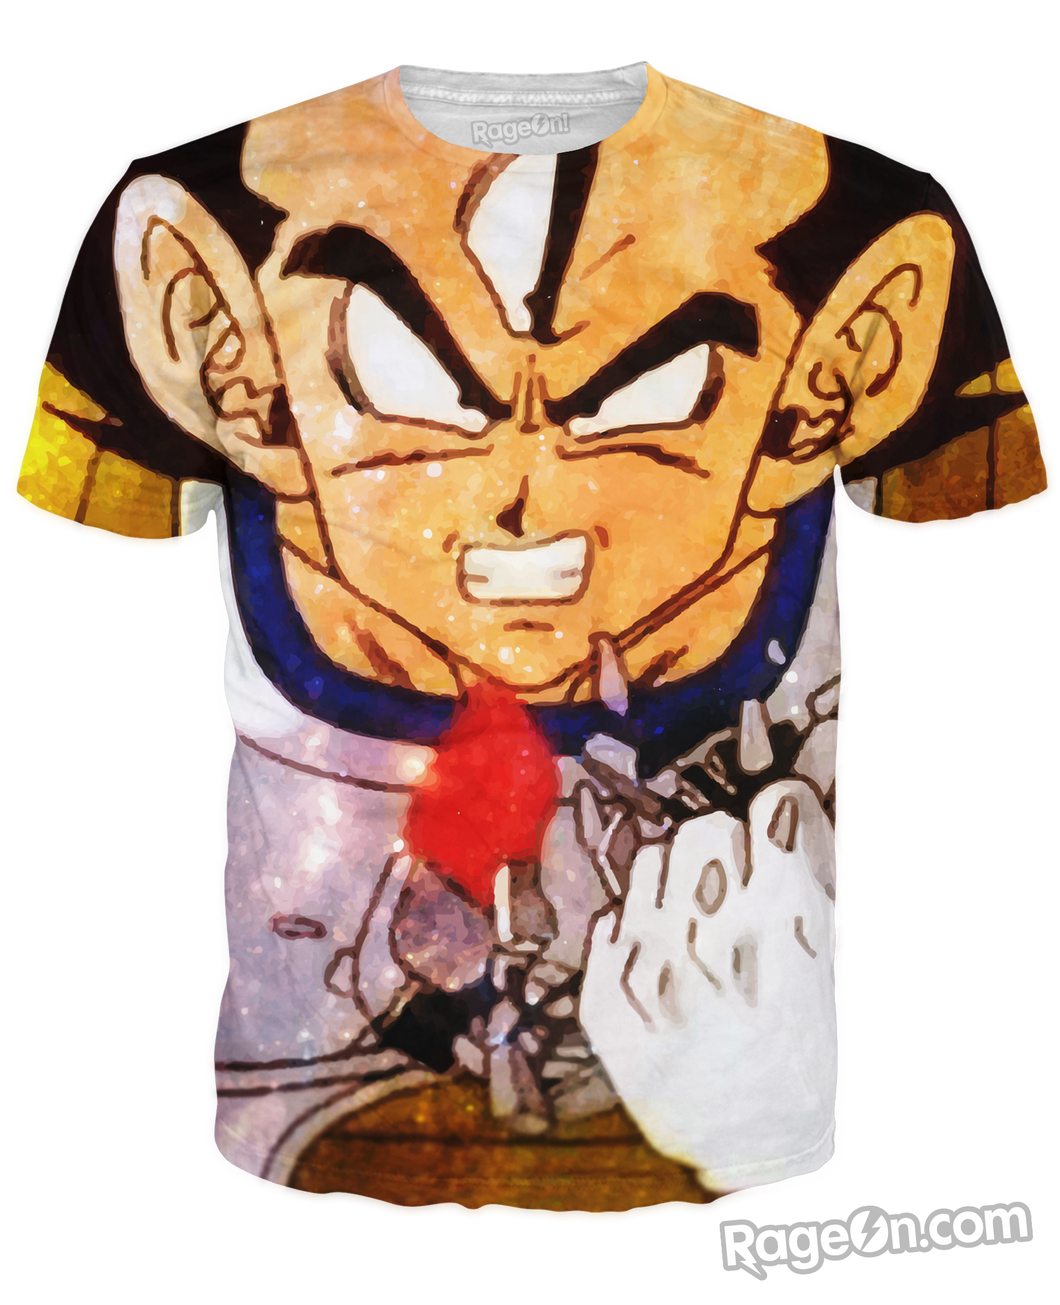 It's Over 9000 T-Shirt